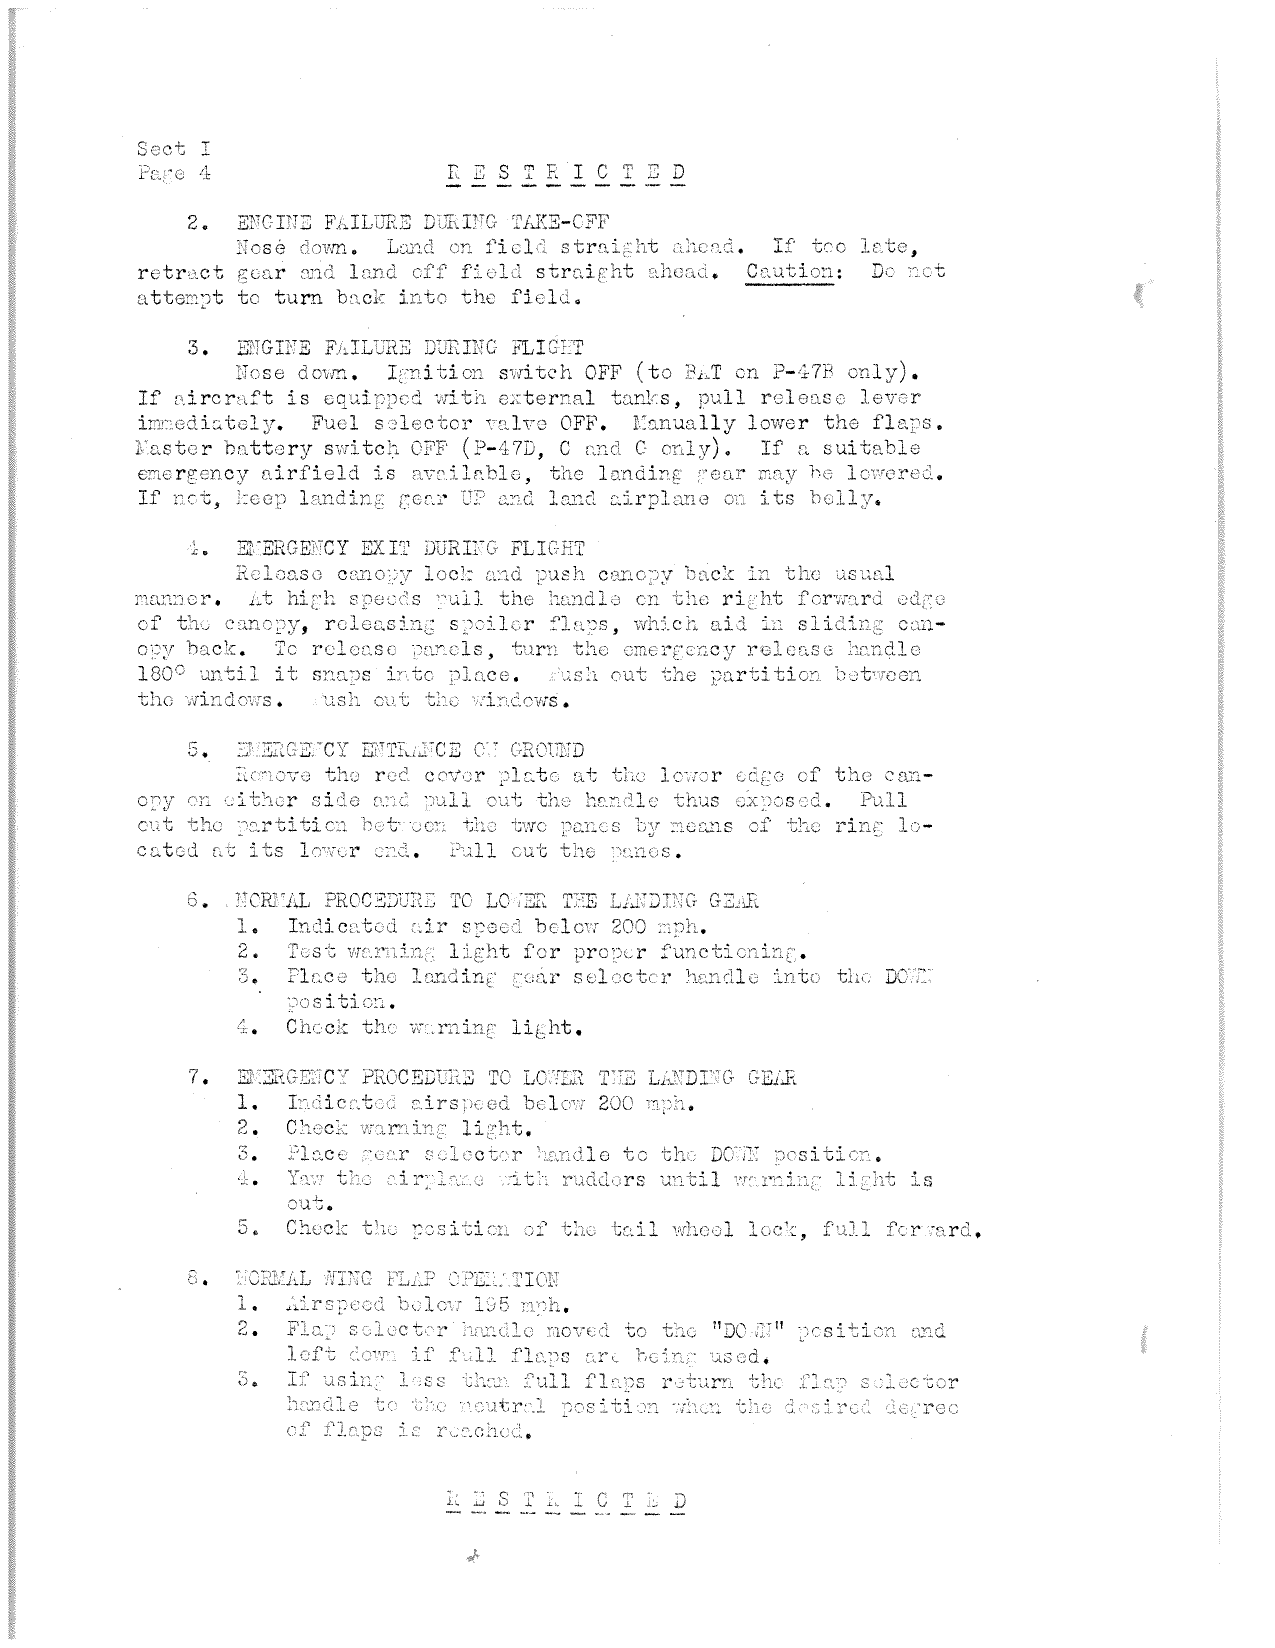 Sample page 5 from AirCorps Library document: Flight Manual for the P-47